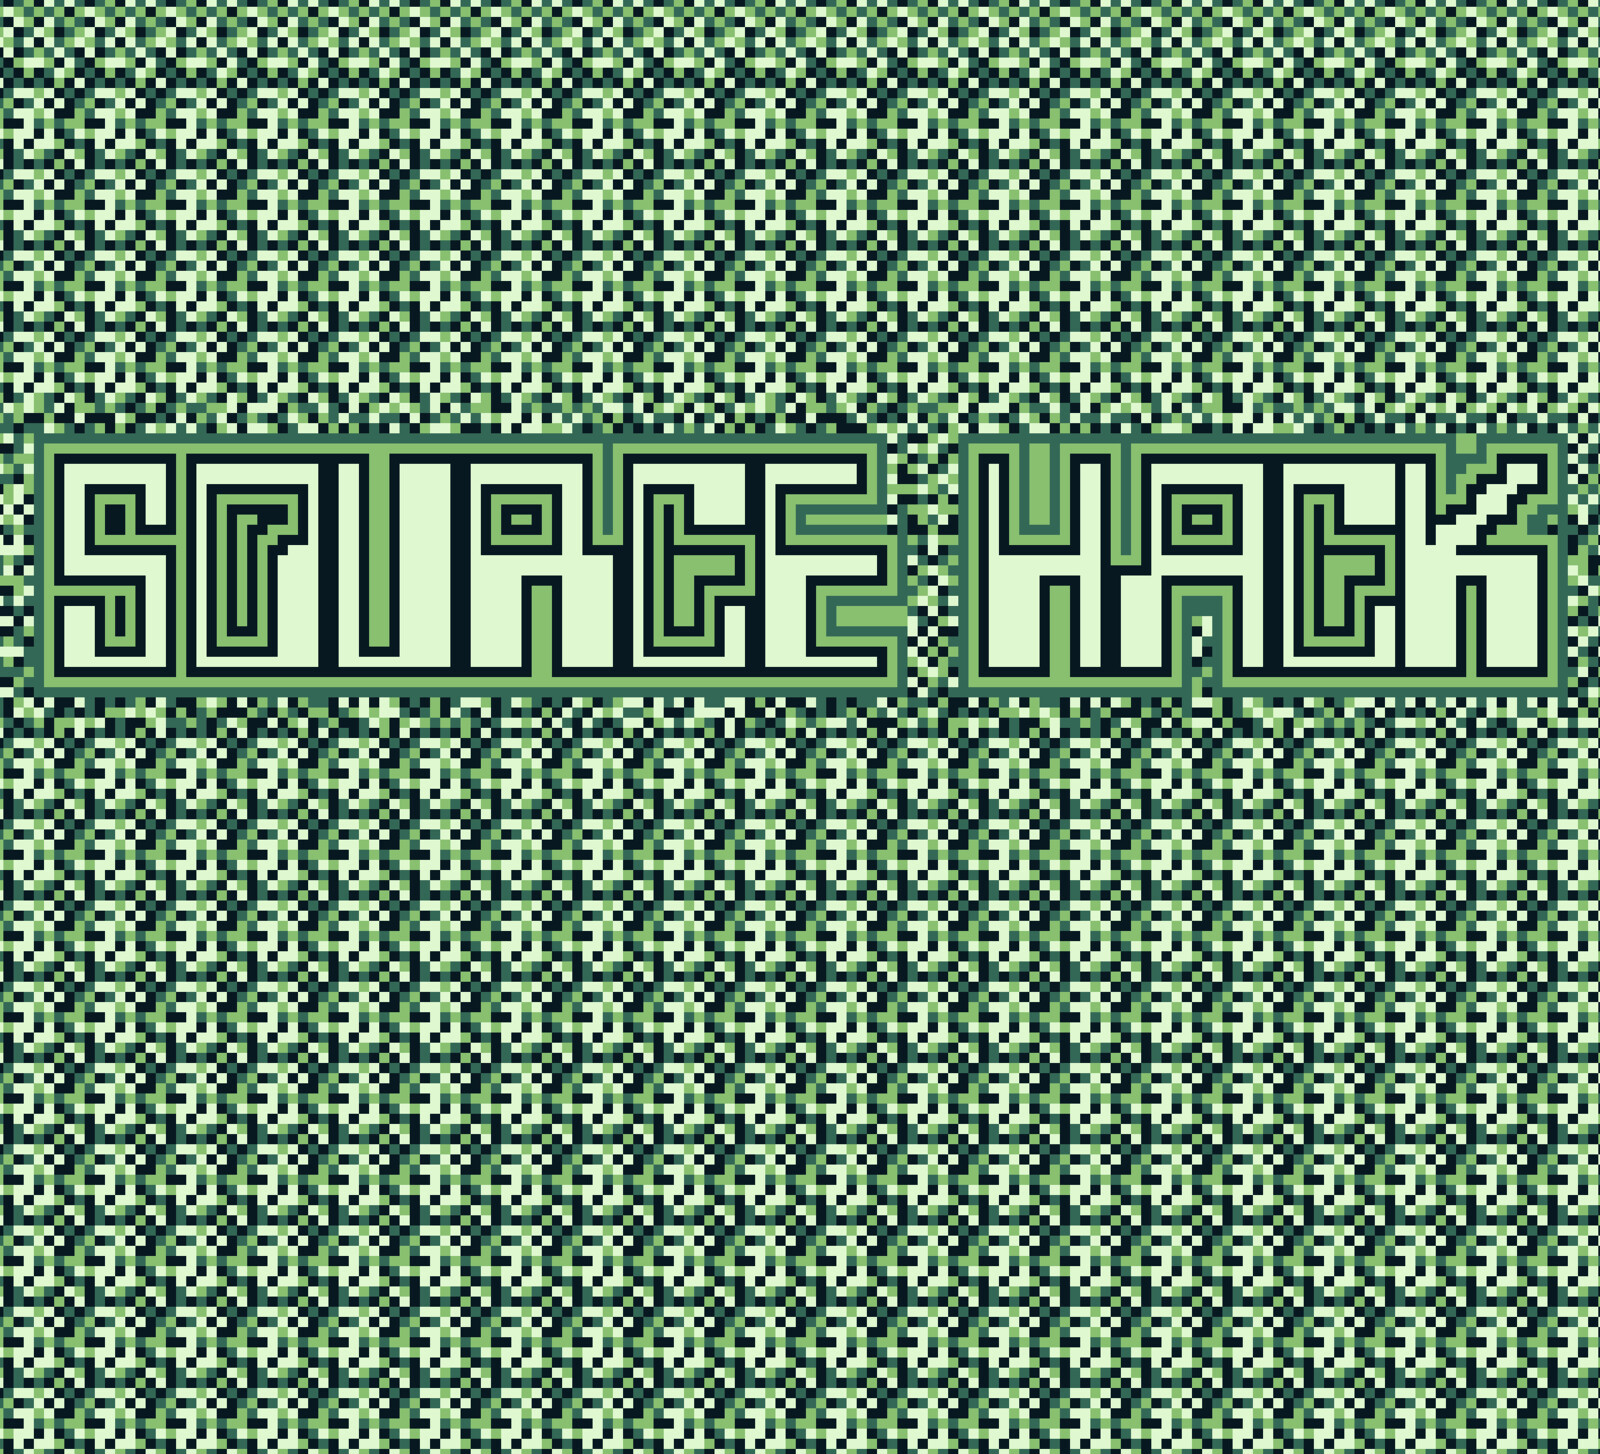 Still of Source Hack's animated title screen